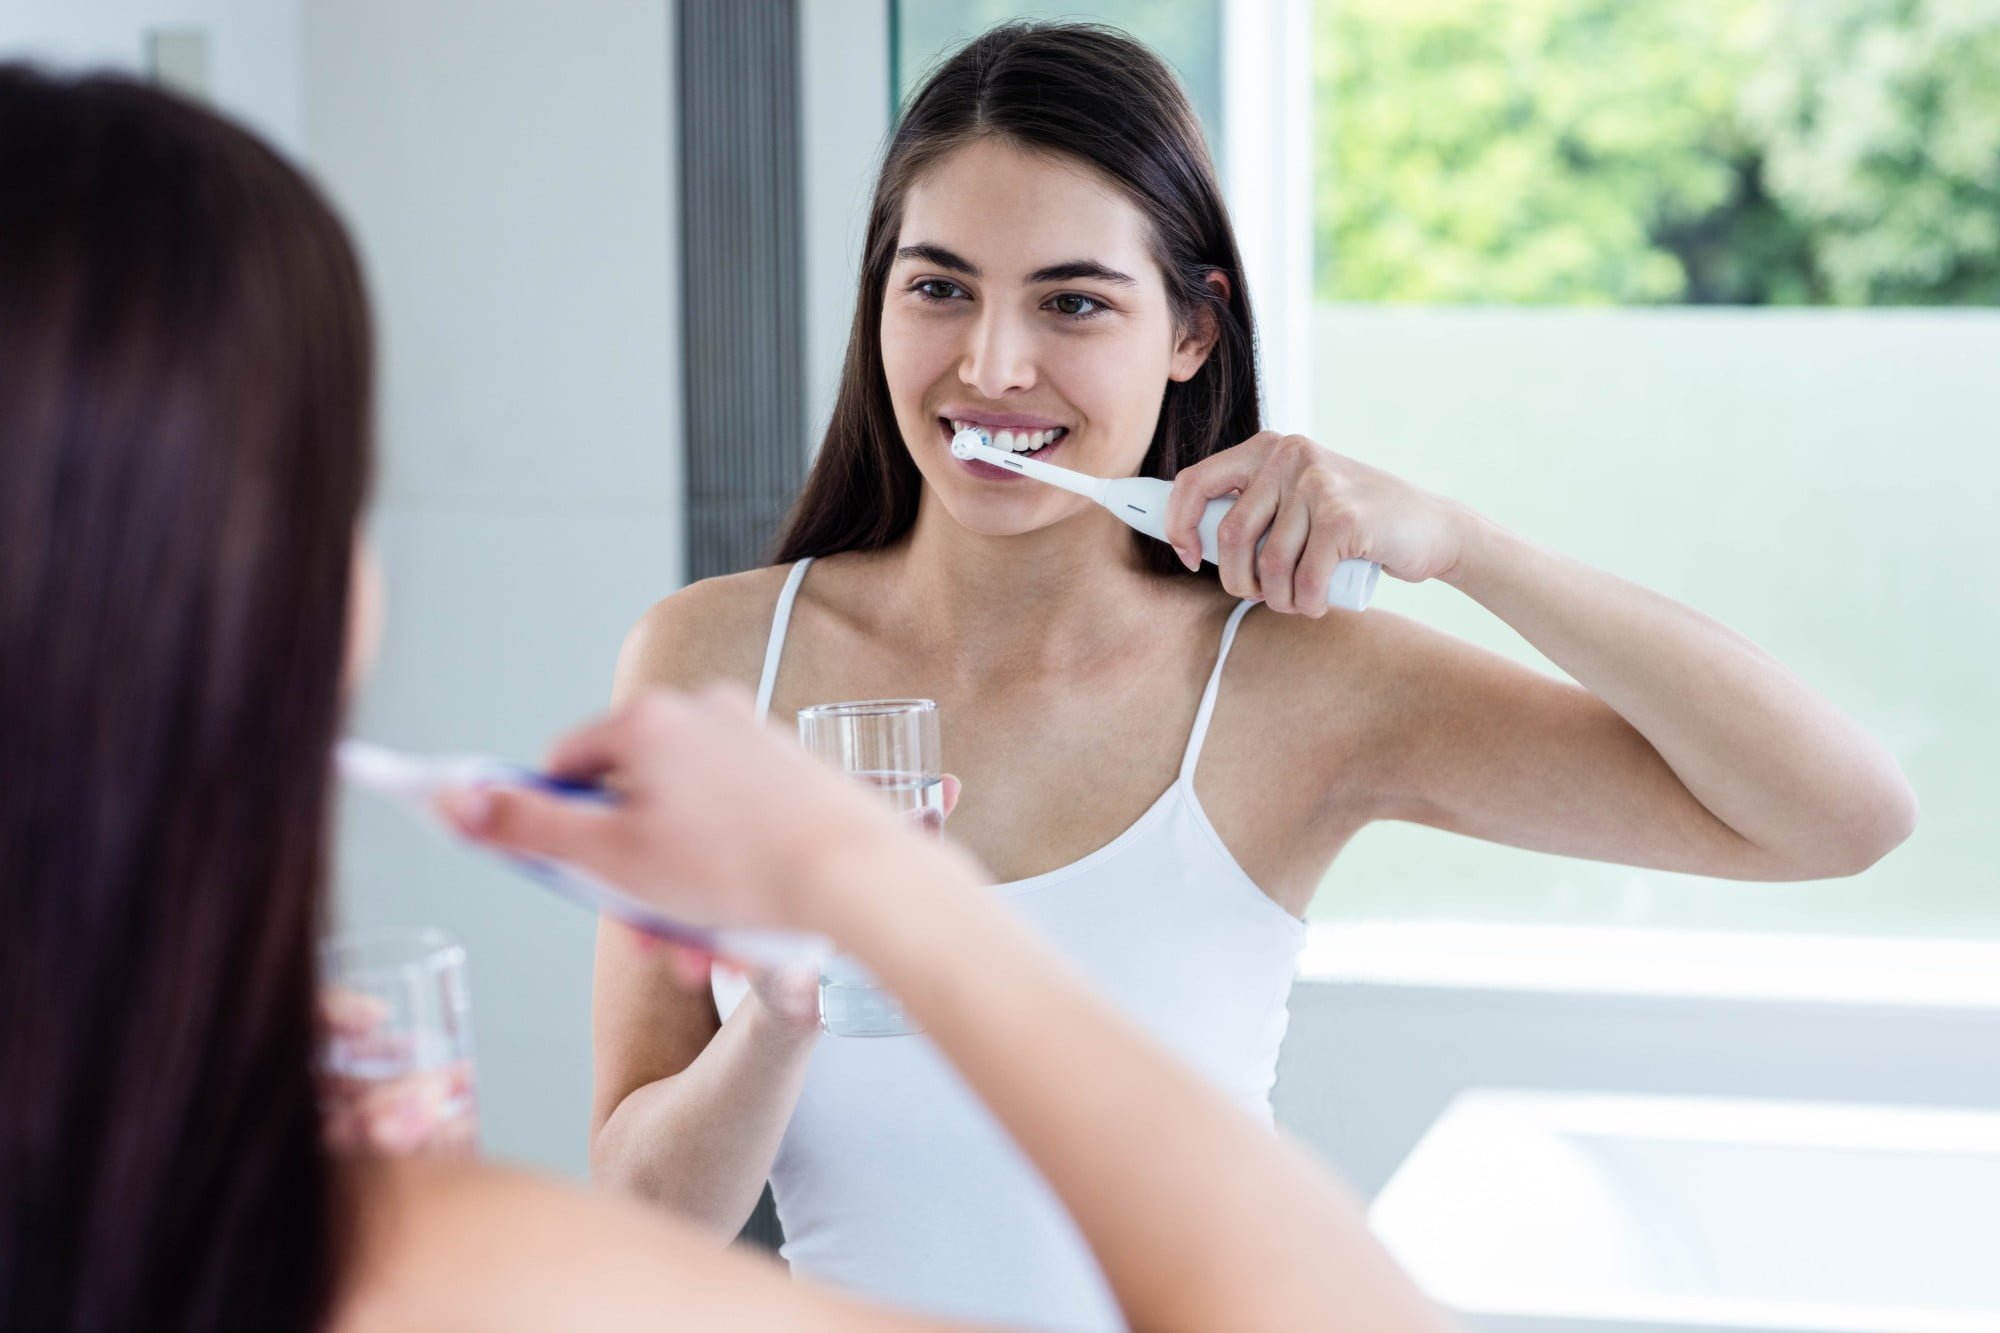 Keeping your smile looking (and feeling) its best doesn't have to be difficult when you follow these four tips for healthy gums and teeth!